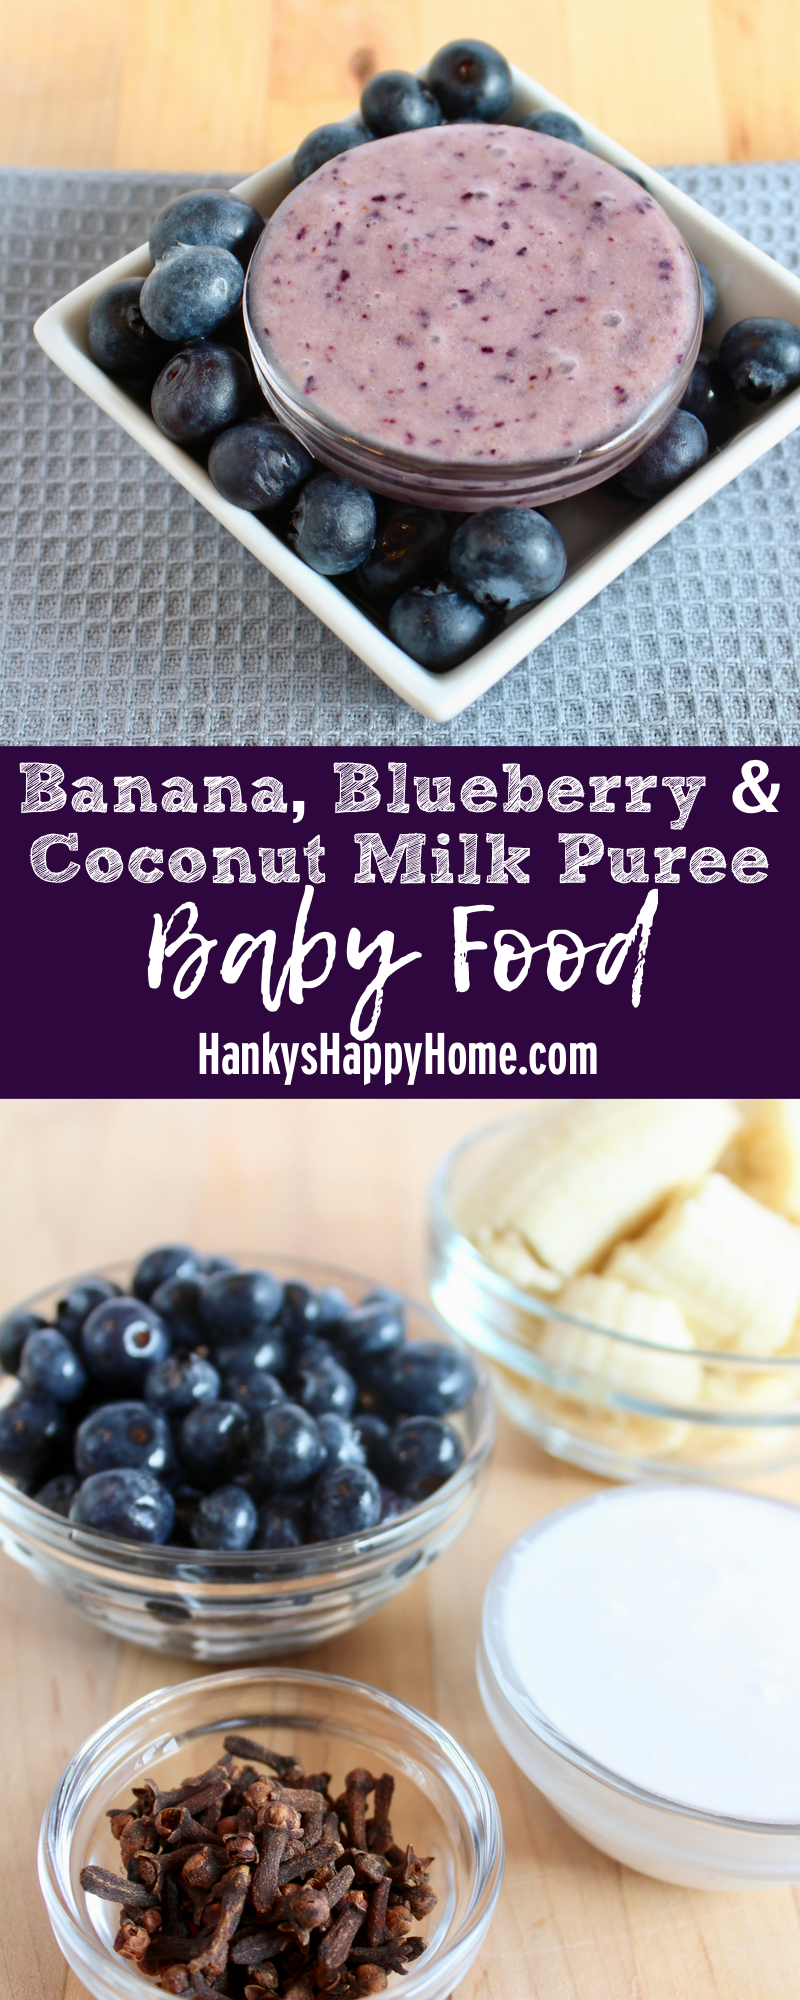 This Banana, Blueberry & Coconut Milk Puree is quick, easy & requires no cooking whatever!